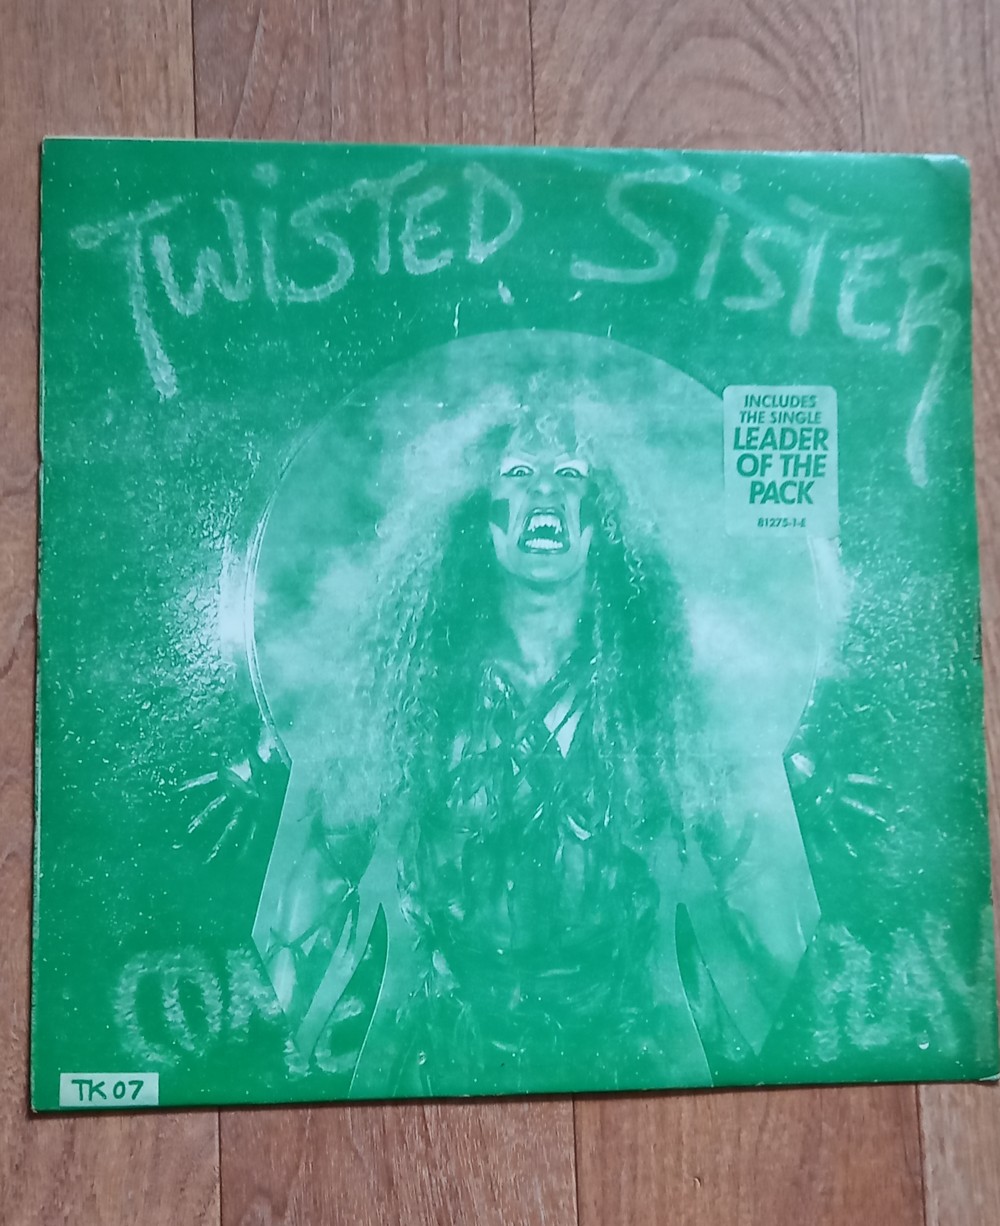 Twisted Sister - Come Out and Play Vinyl Photo | Metal Kingdom